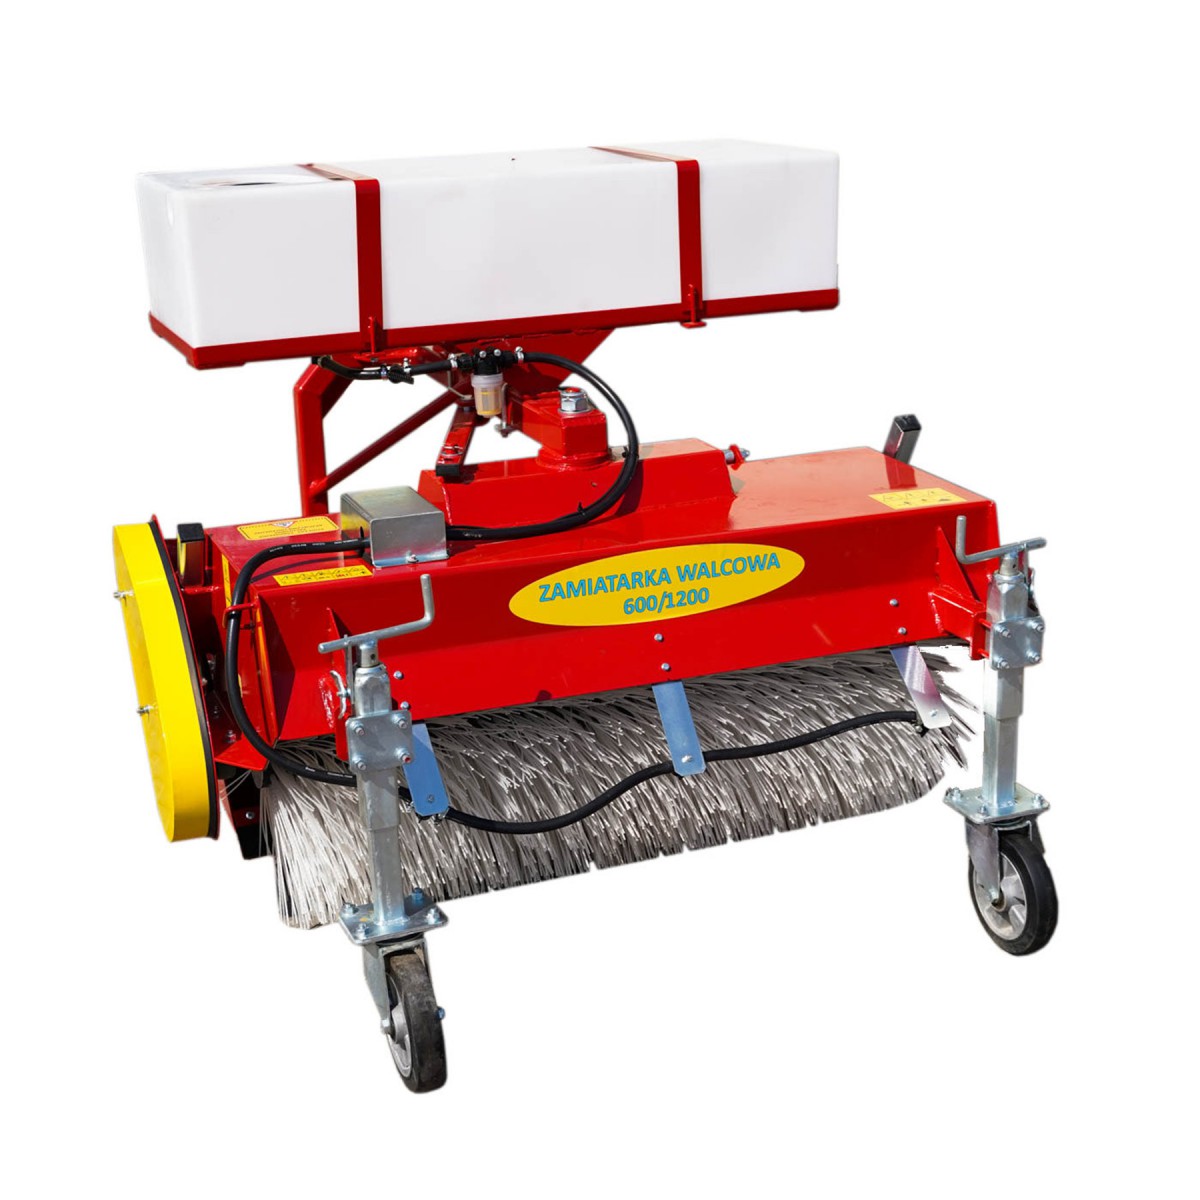 150 cm sweeper for a tractor with a basket and a 4FARMER watering container